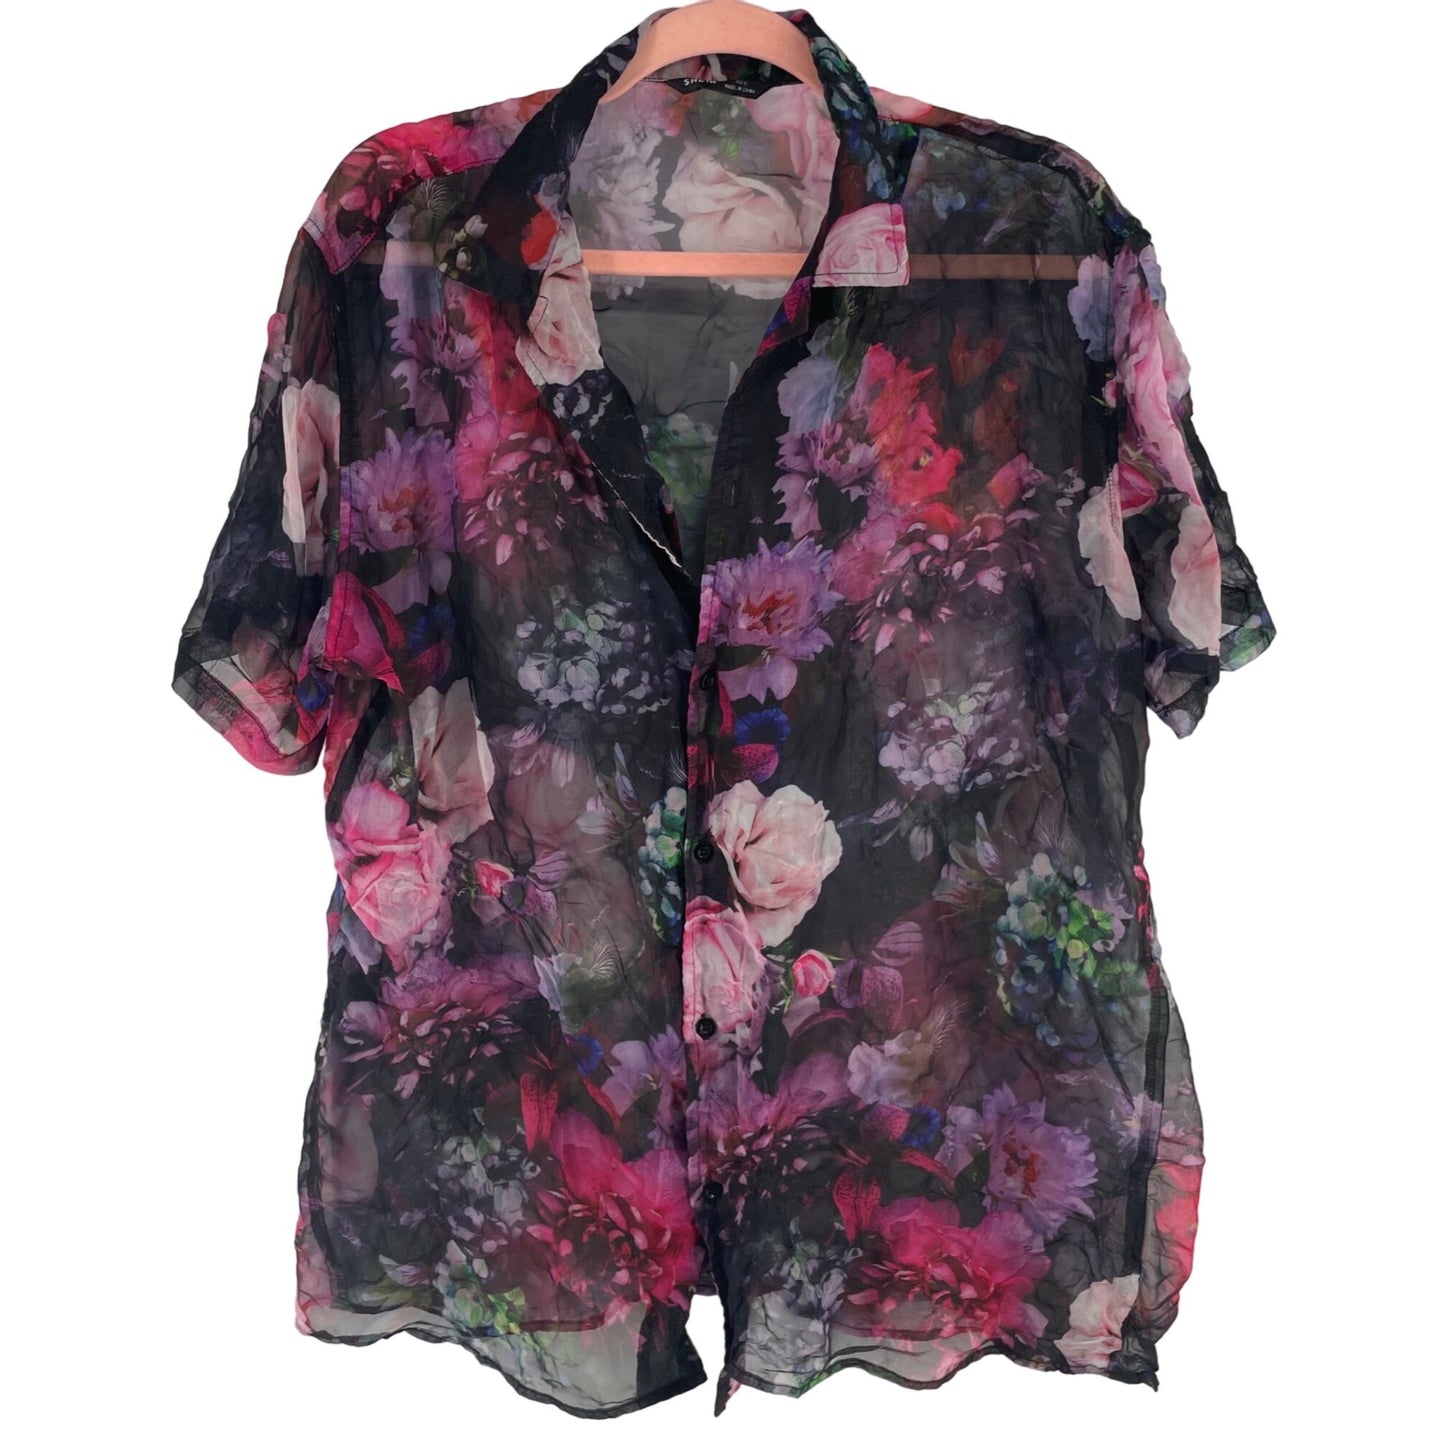 Shein Women's Size XL Short-Sleeved Sheer Button-Down Crinkly Floral Multi-Colored Top